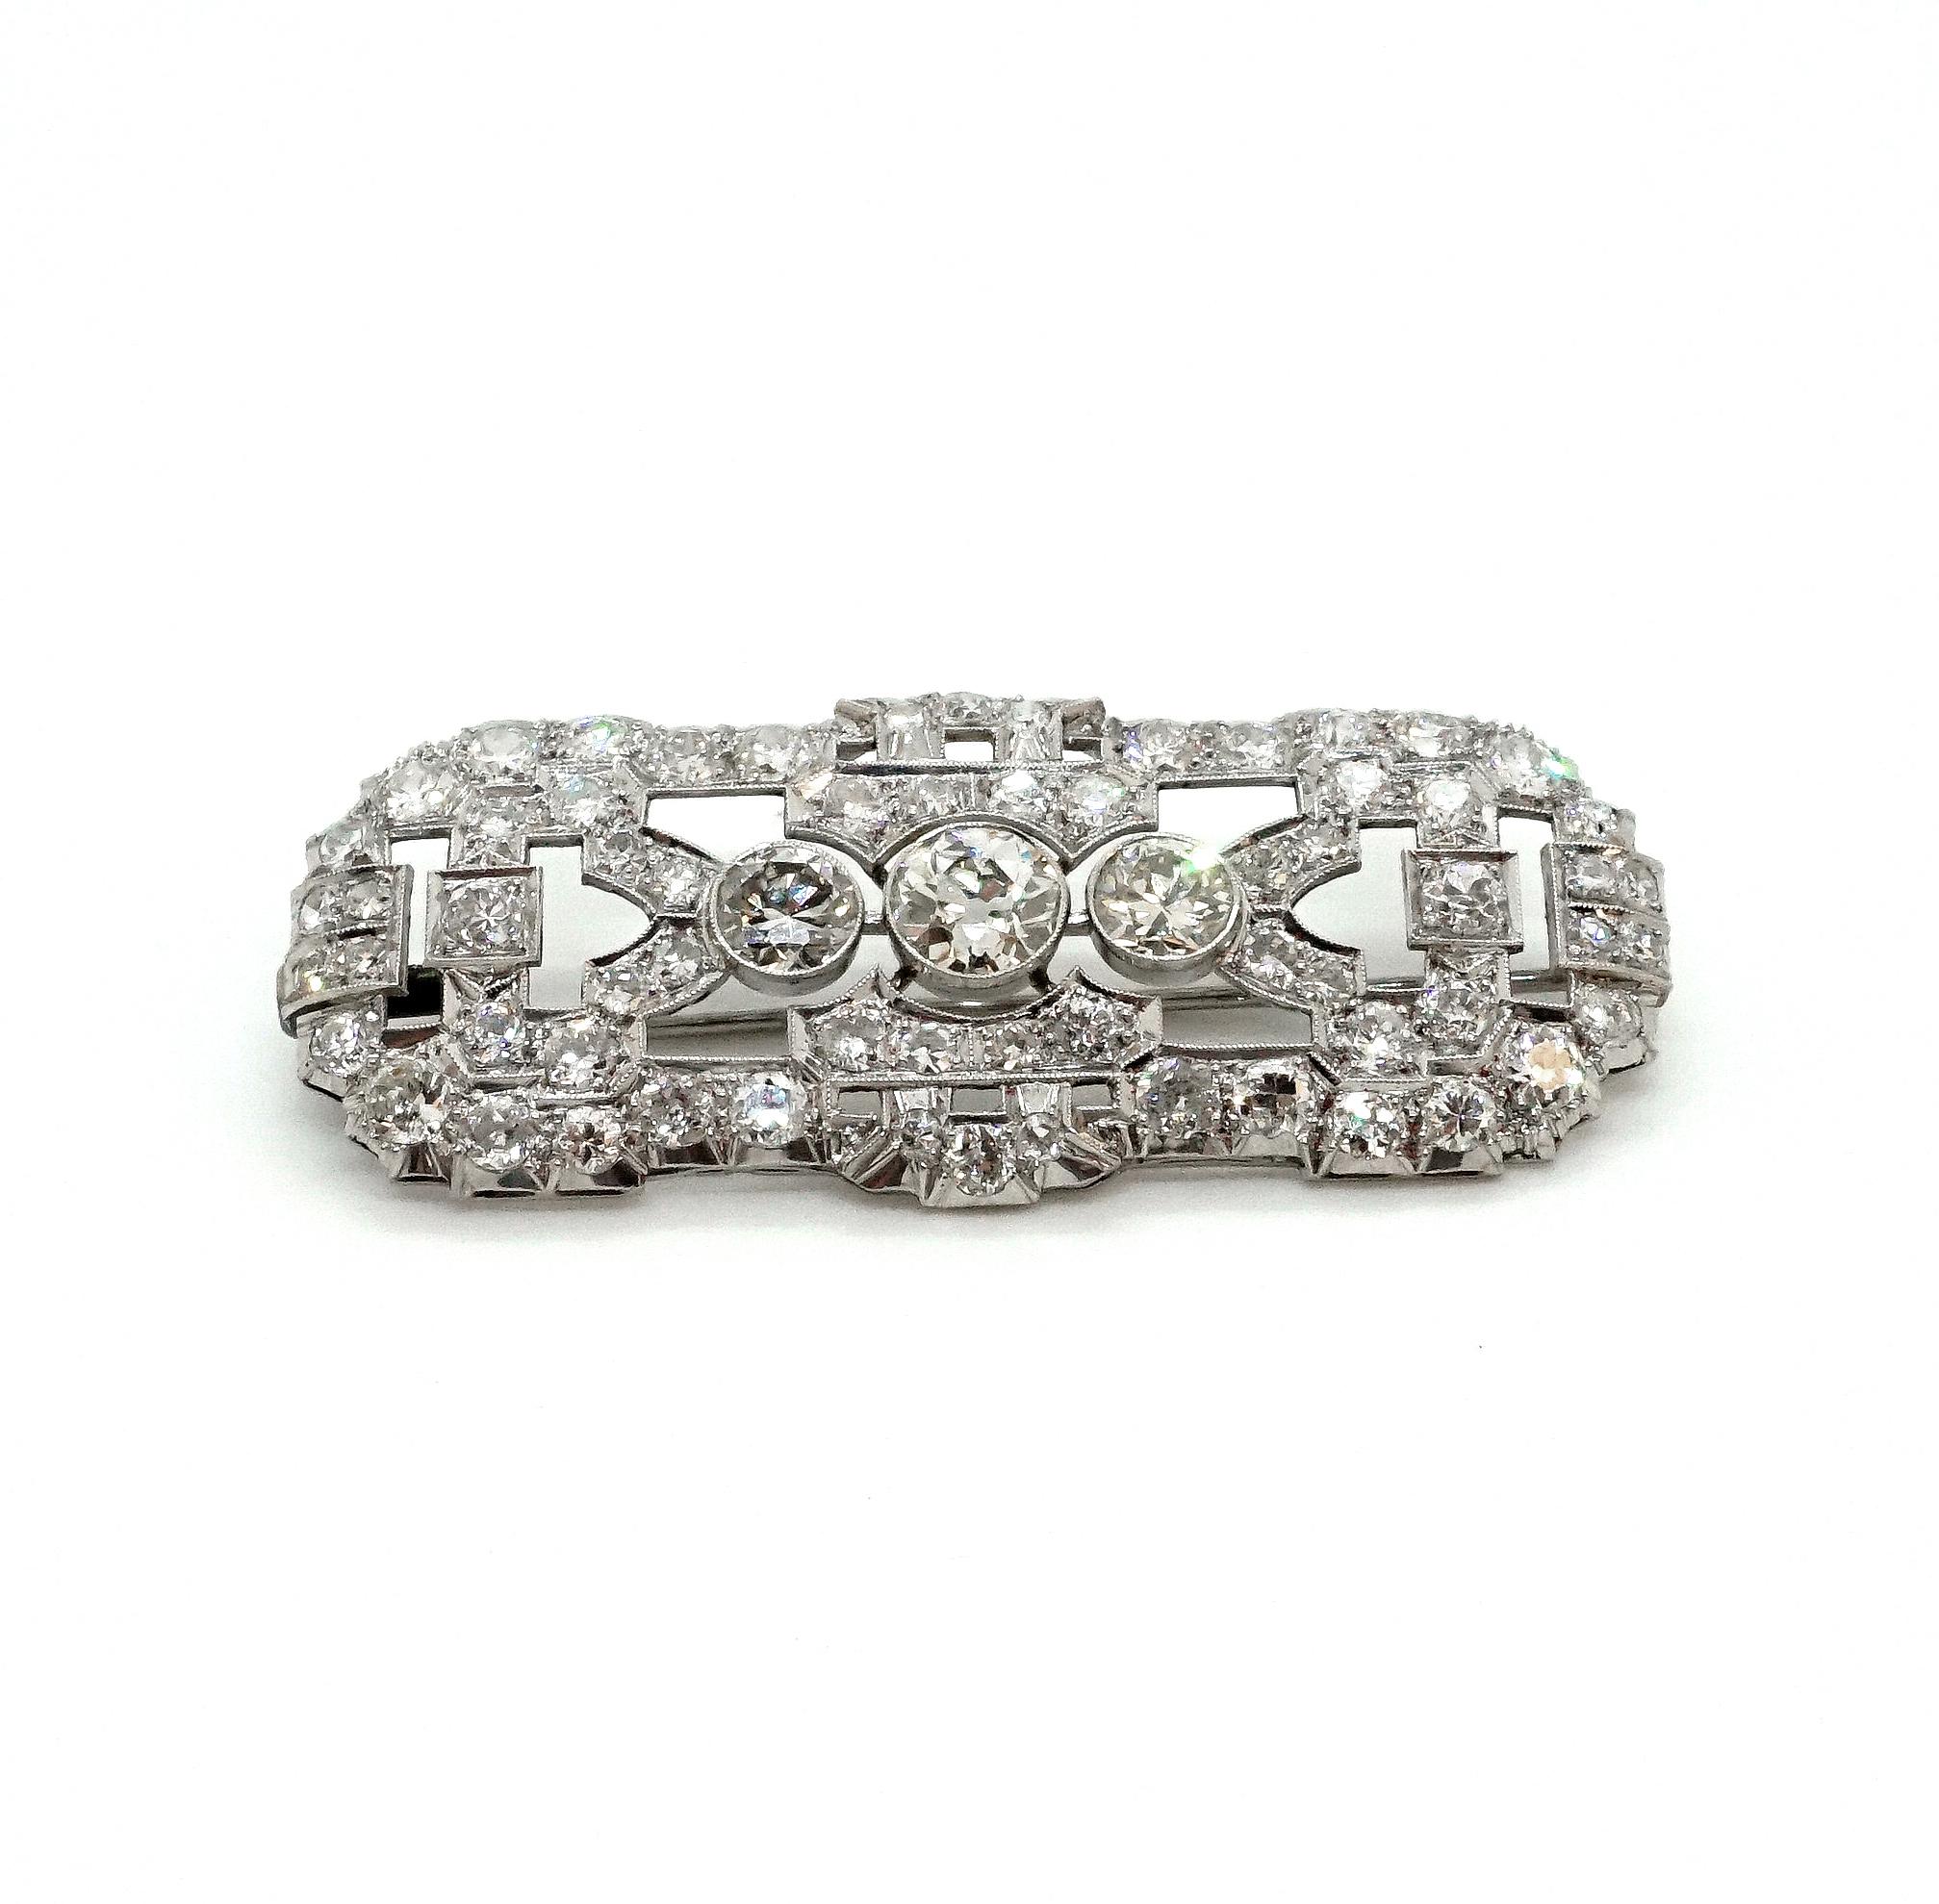 Elegant Viennese Art Déco Platinum Brooch With Numerous Old Cut Diamonds. Elongated shape with fine open worked hand made milgrain setting, centered with three larger stones, ca. 3.0 ct.
Particularly good quality of stones.
Safety catch